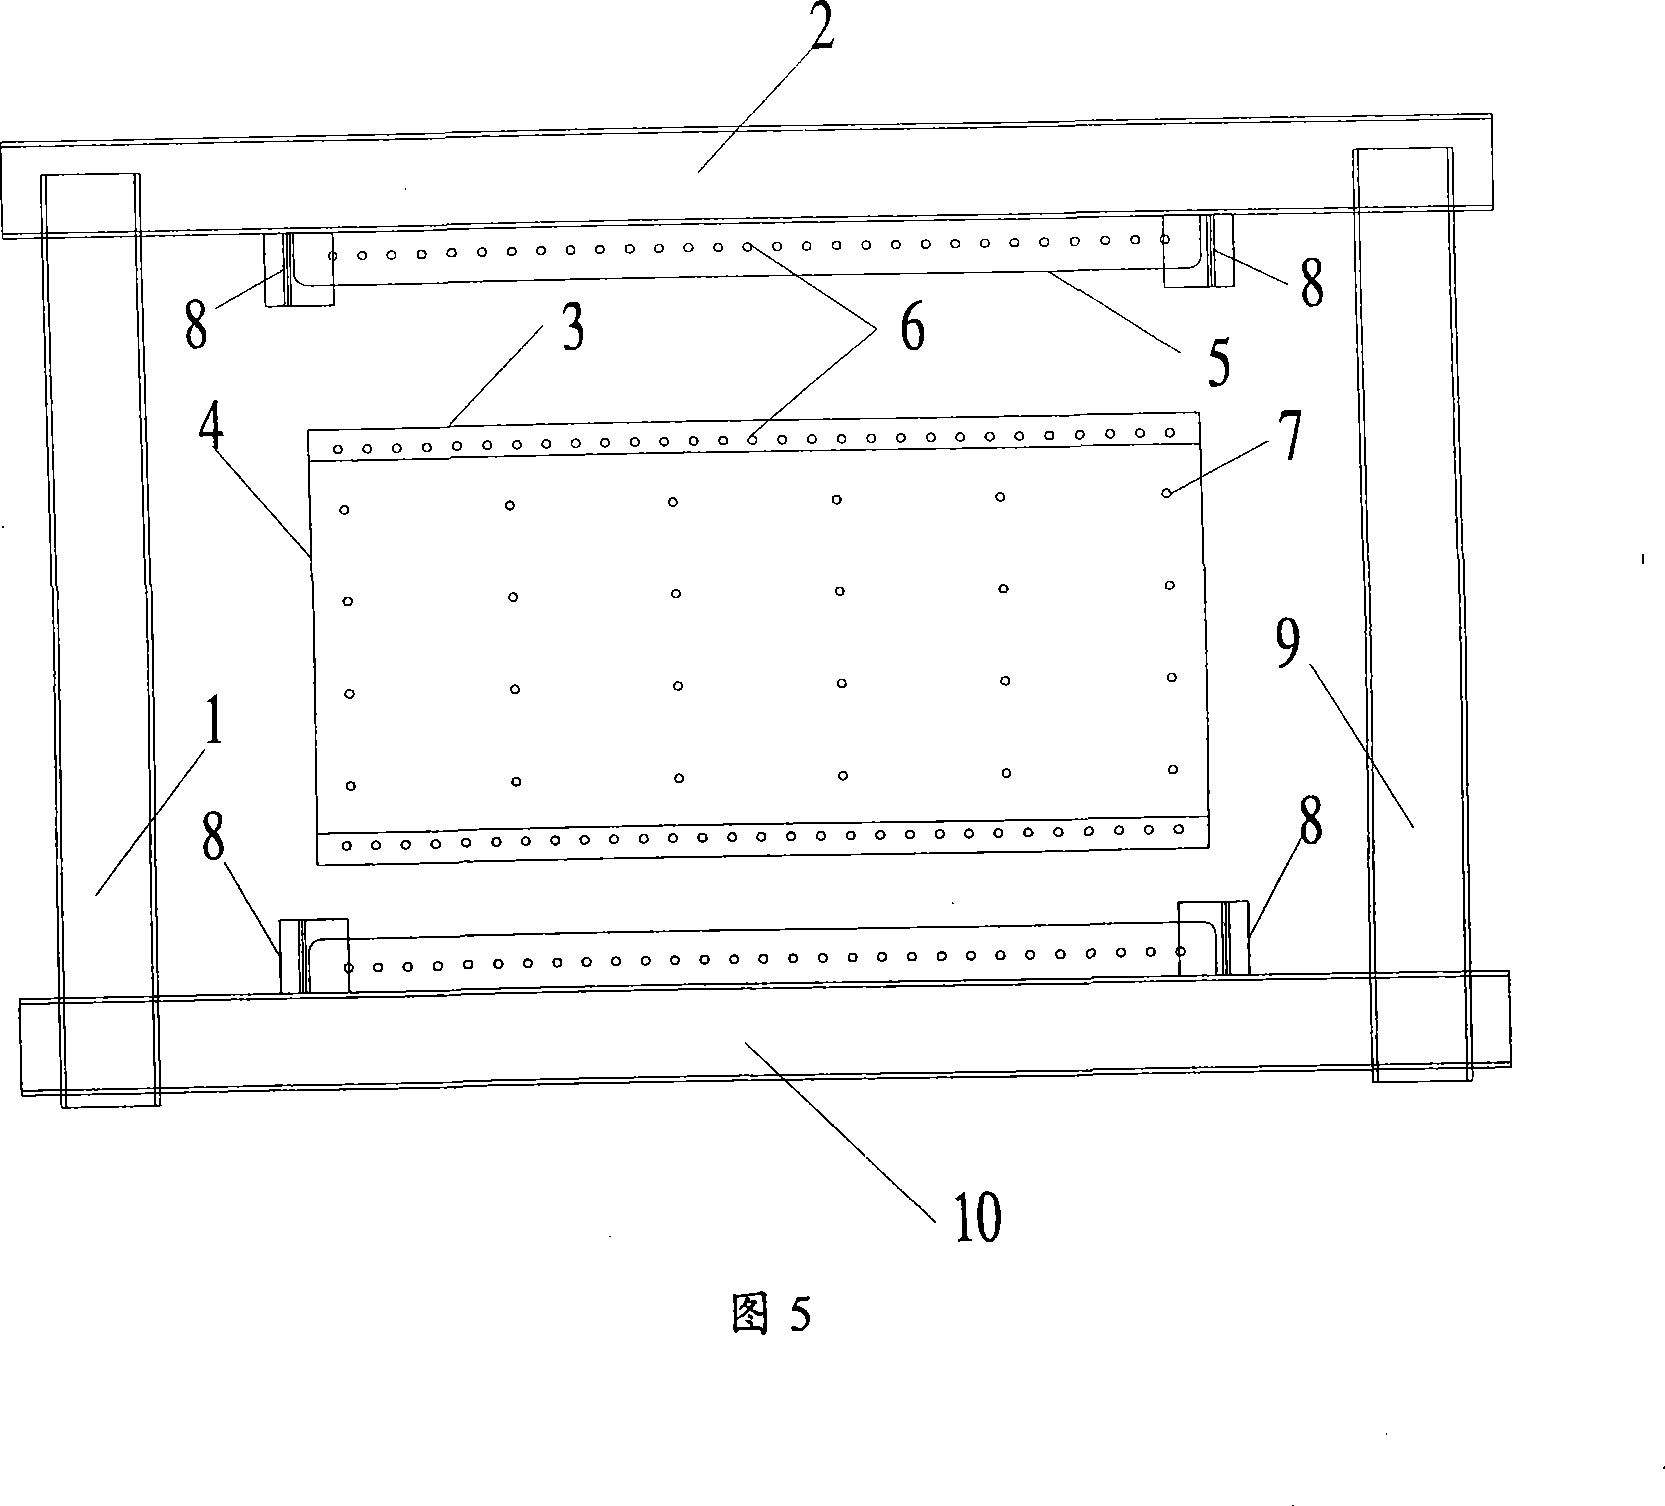 Two-side-connection combined steel plate shearing force wall